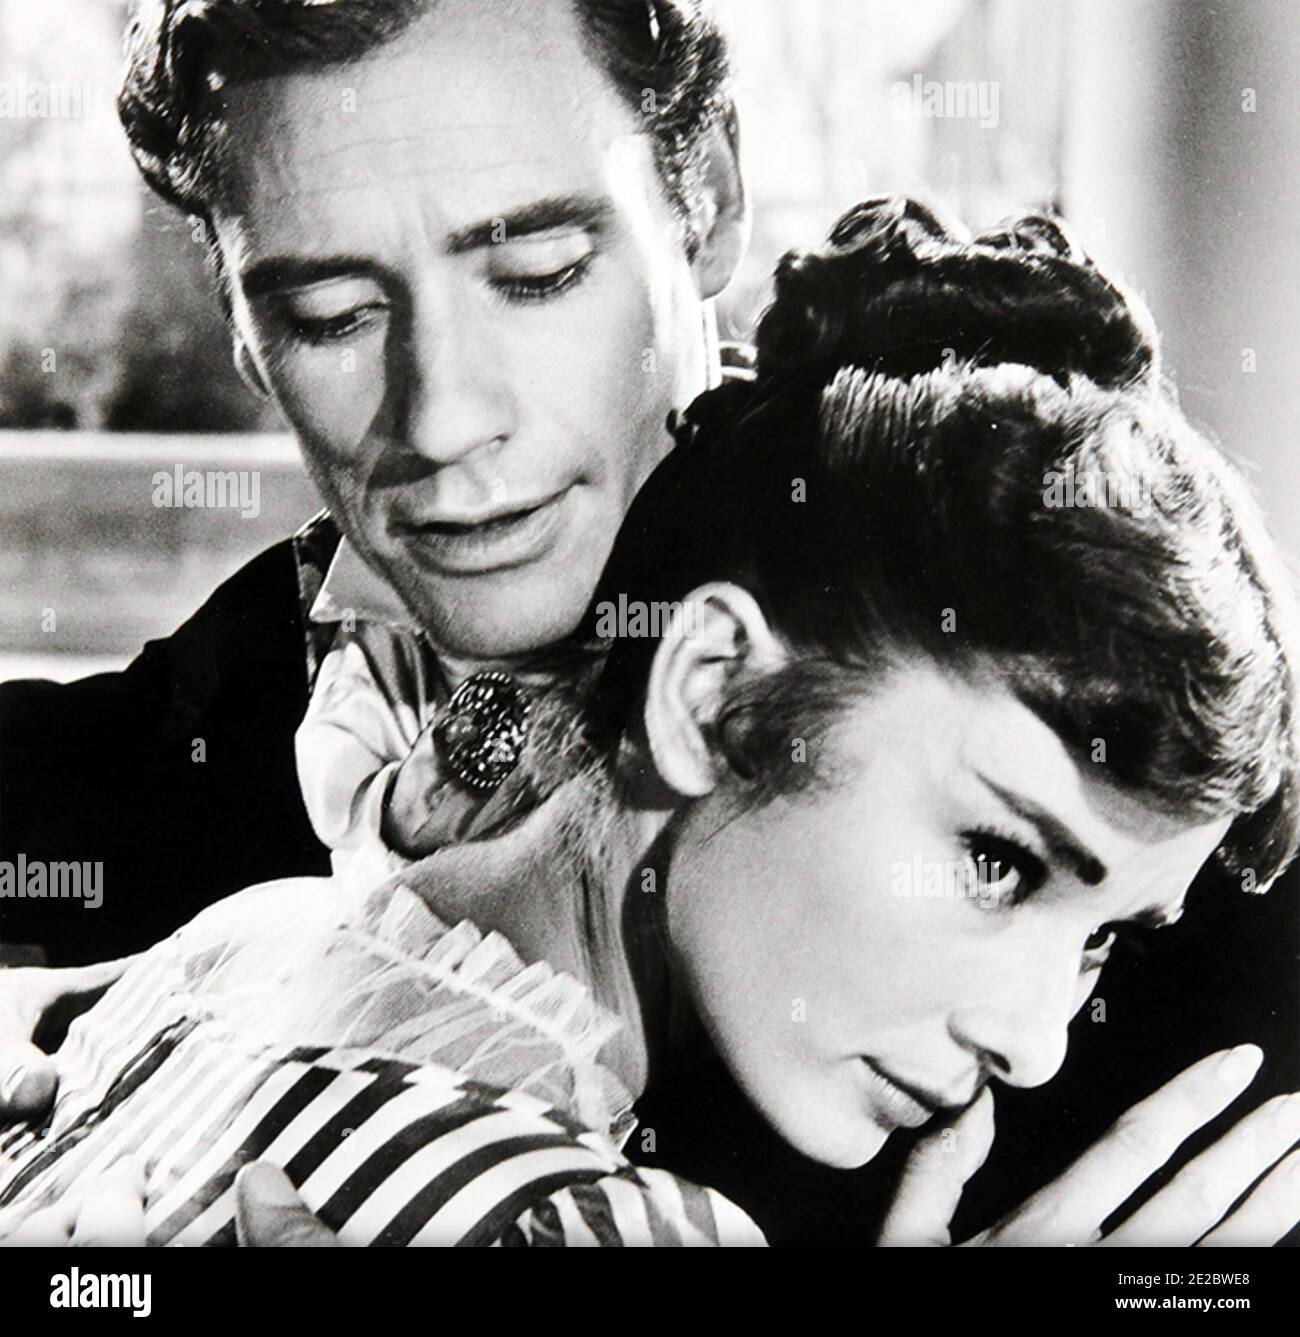 WAR AND PEACE 1956 Paramount Pictures film with Mel Ferrer and Audrey Hepburn Stock Photo